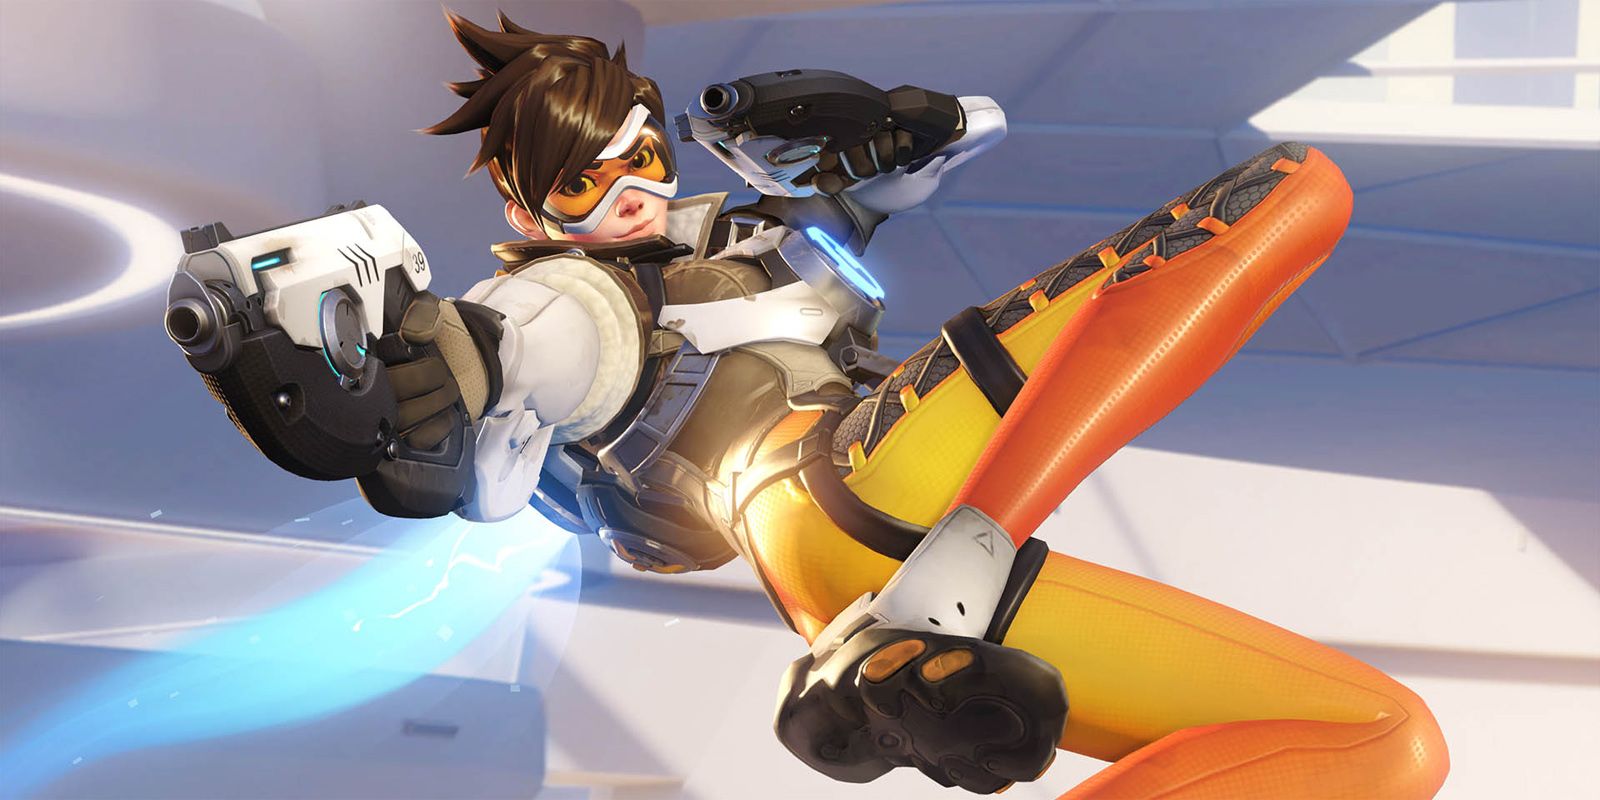 Overwatch Xbox Series X/S Upgrade Quietly Rolls Out & Skips PS5 For Now